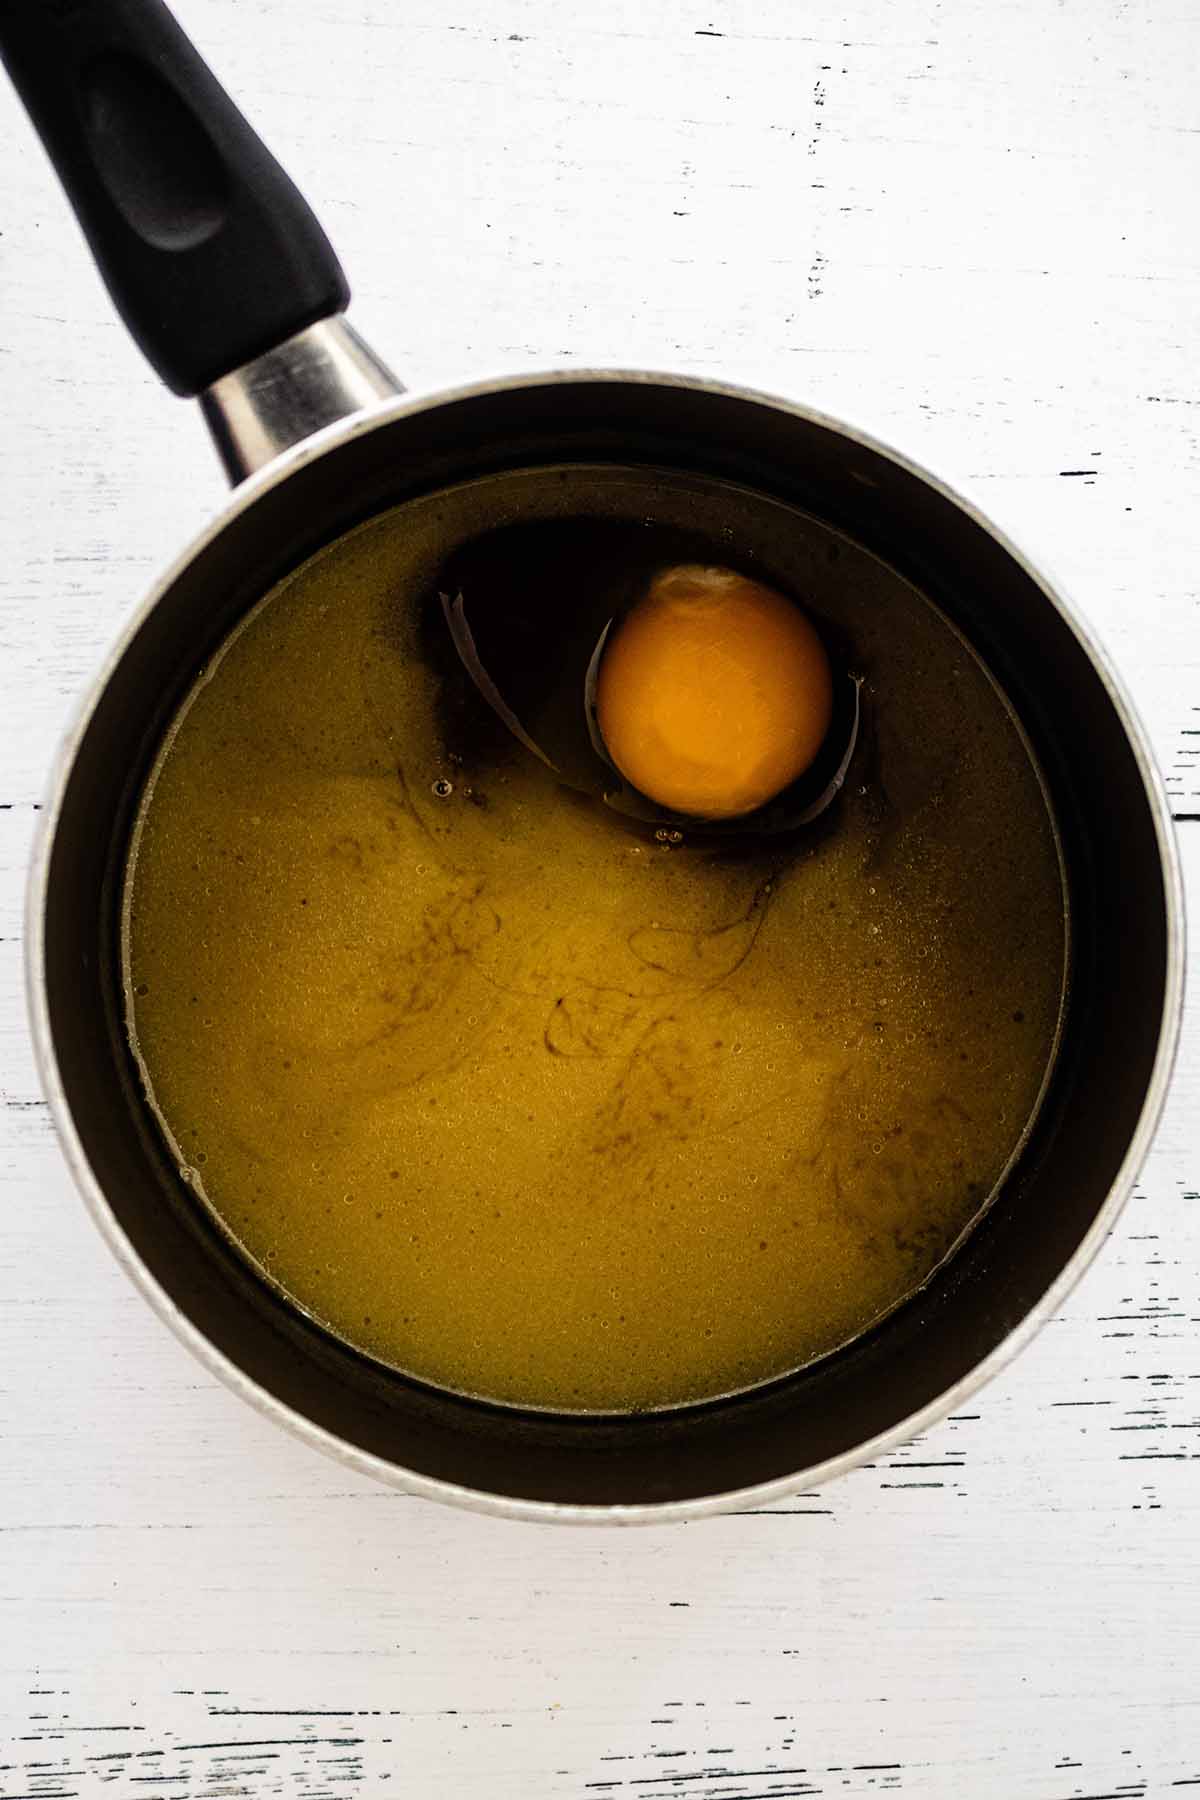 Egg in apple cider and butter mixture in a saucepan.